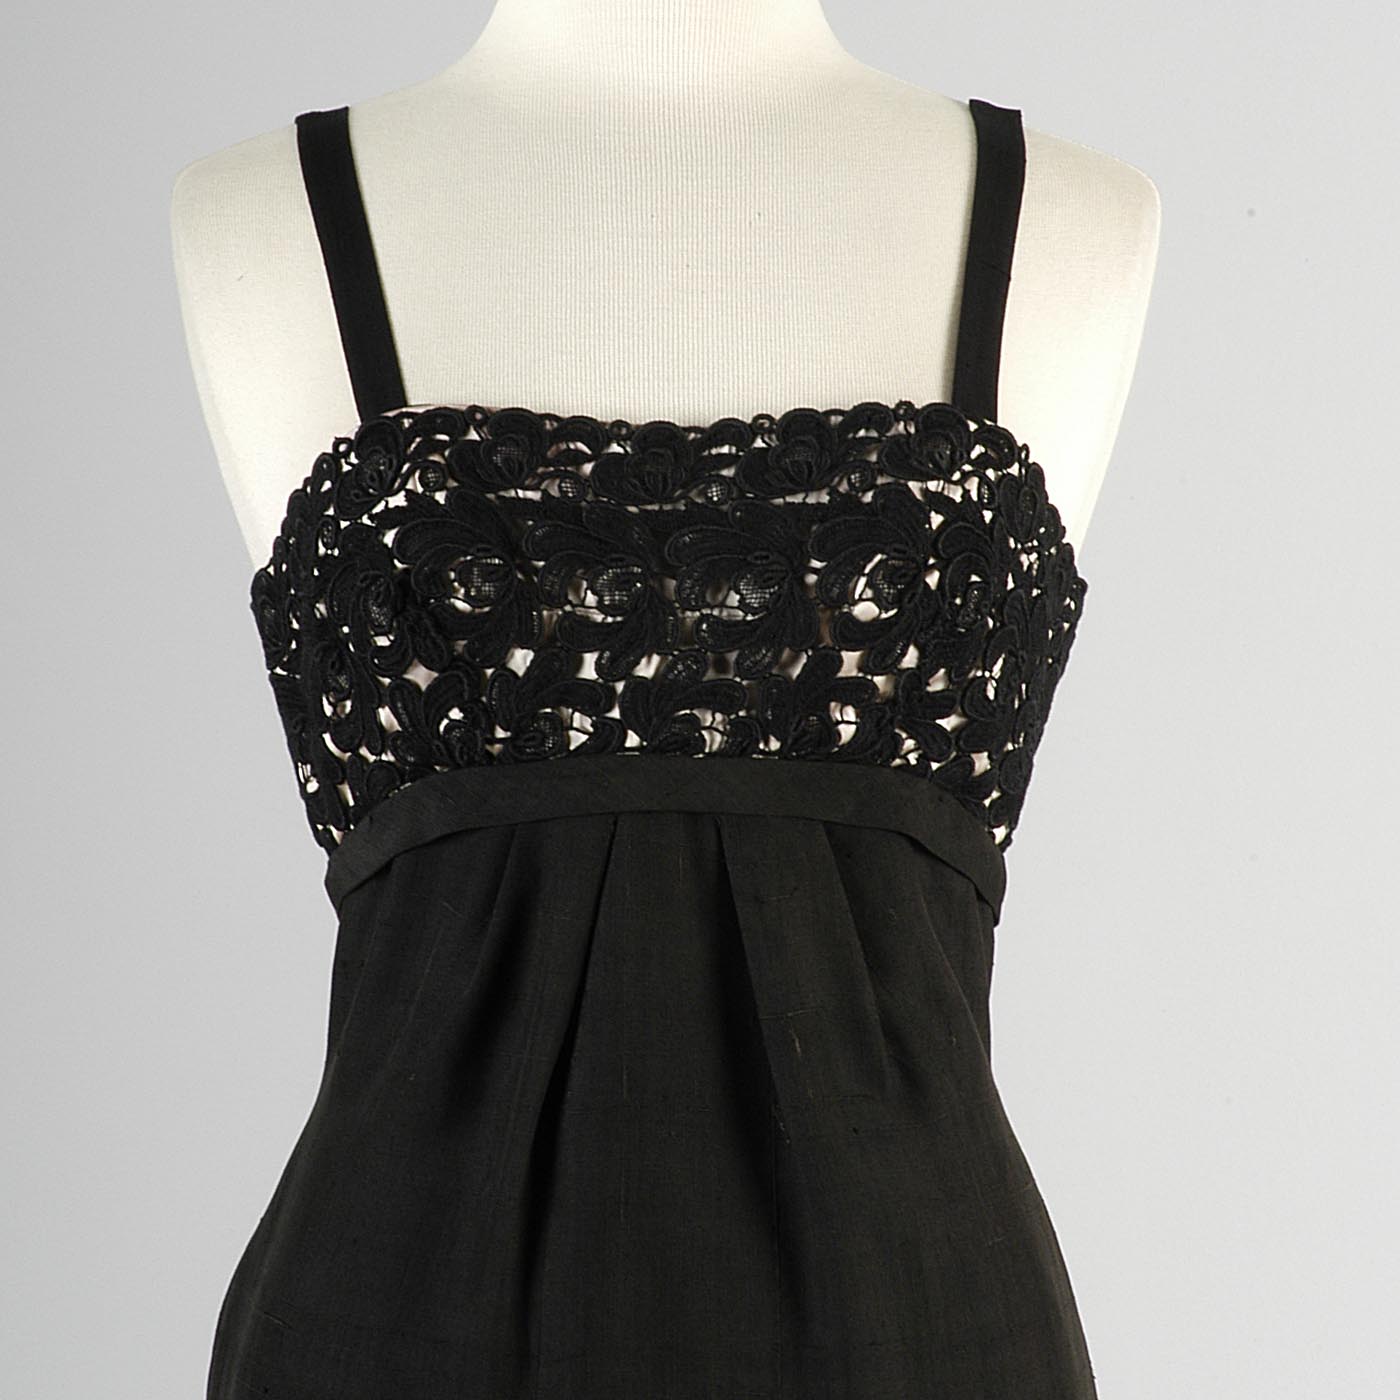 1950s Black Silk Dress with Illusion Bust